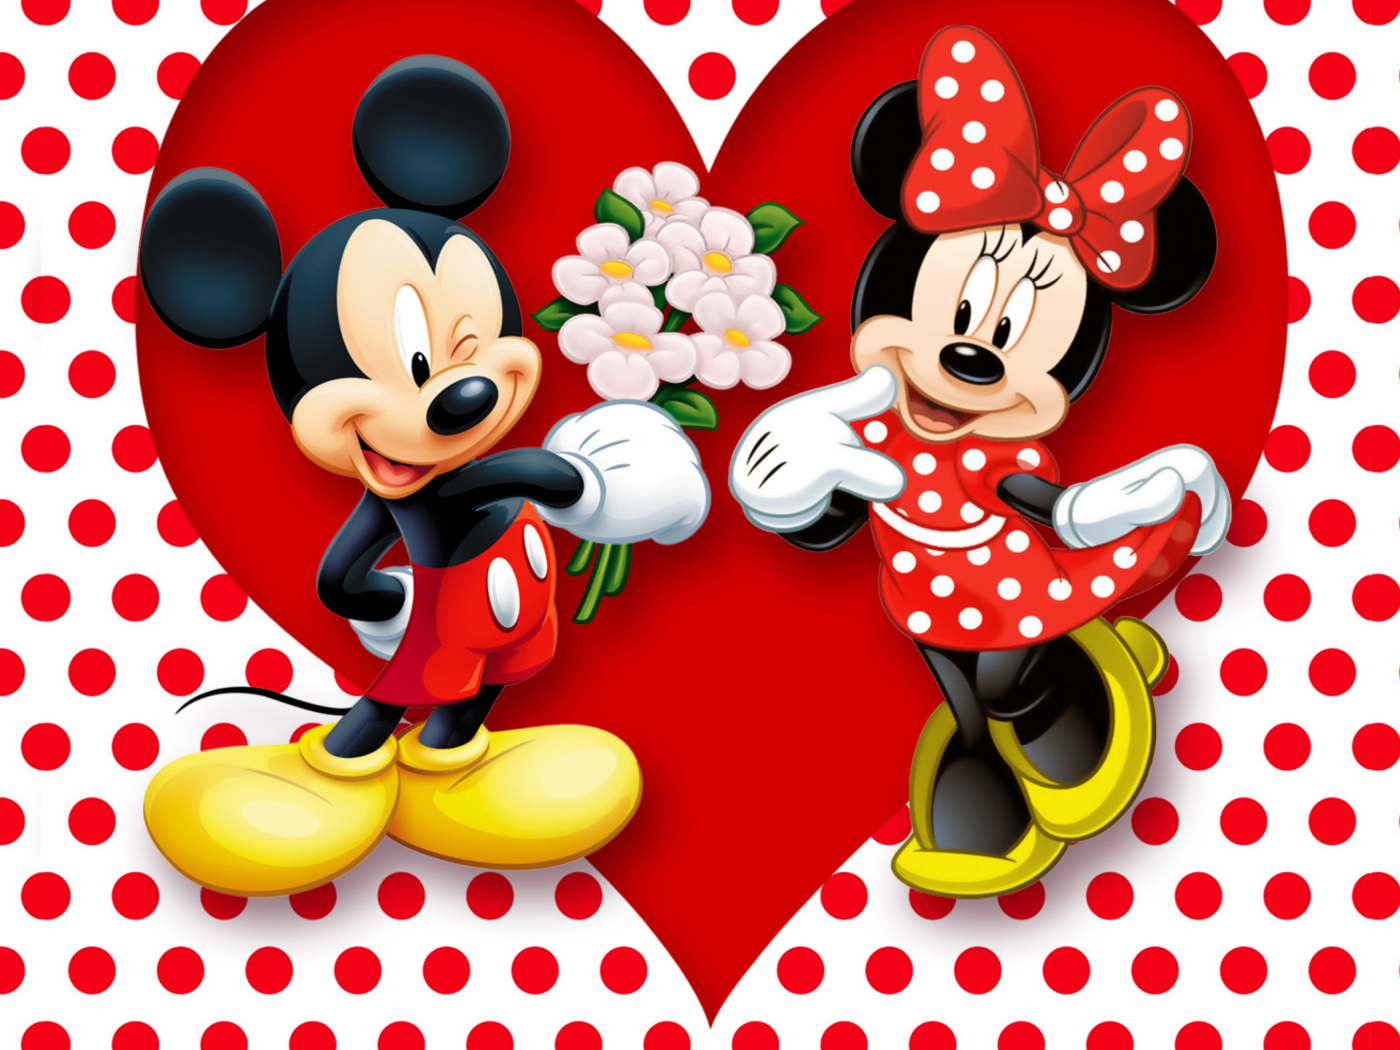 Das Mickey And Minnie Mouse Wallpaper 1400x1050